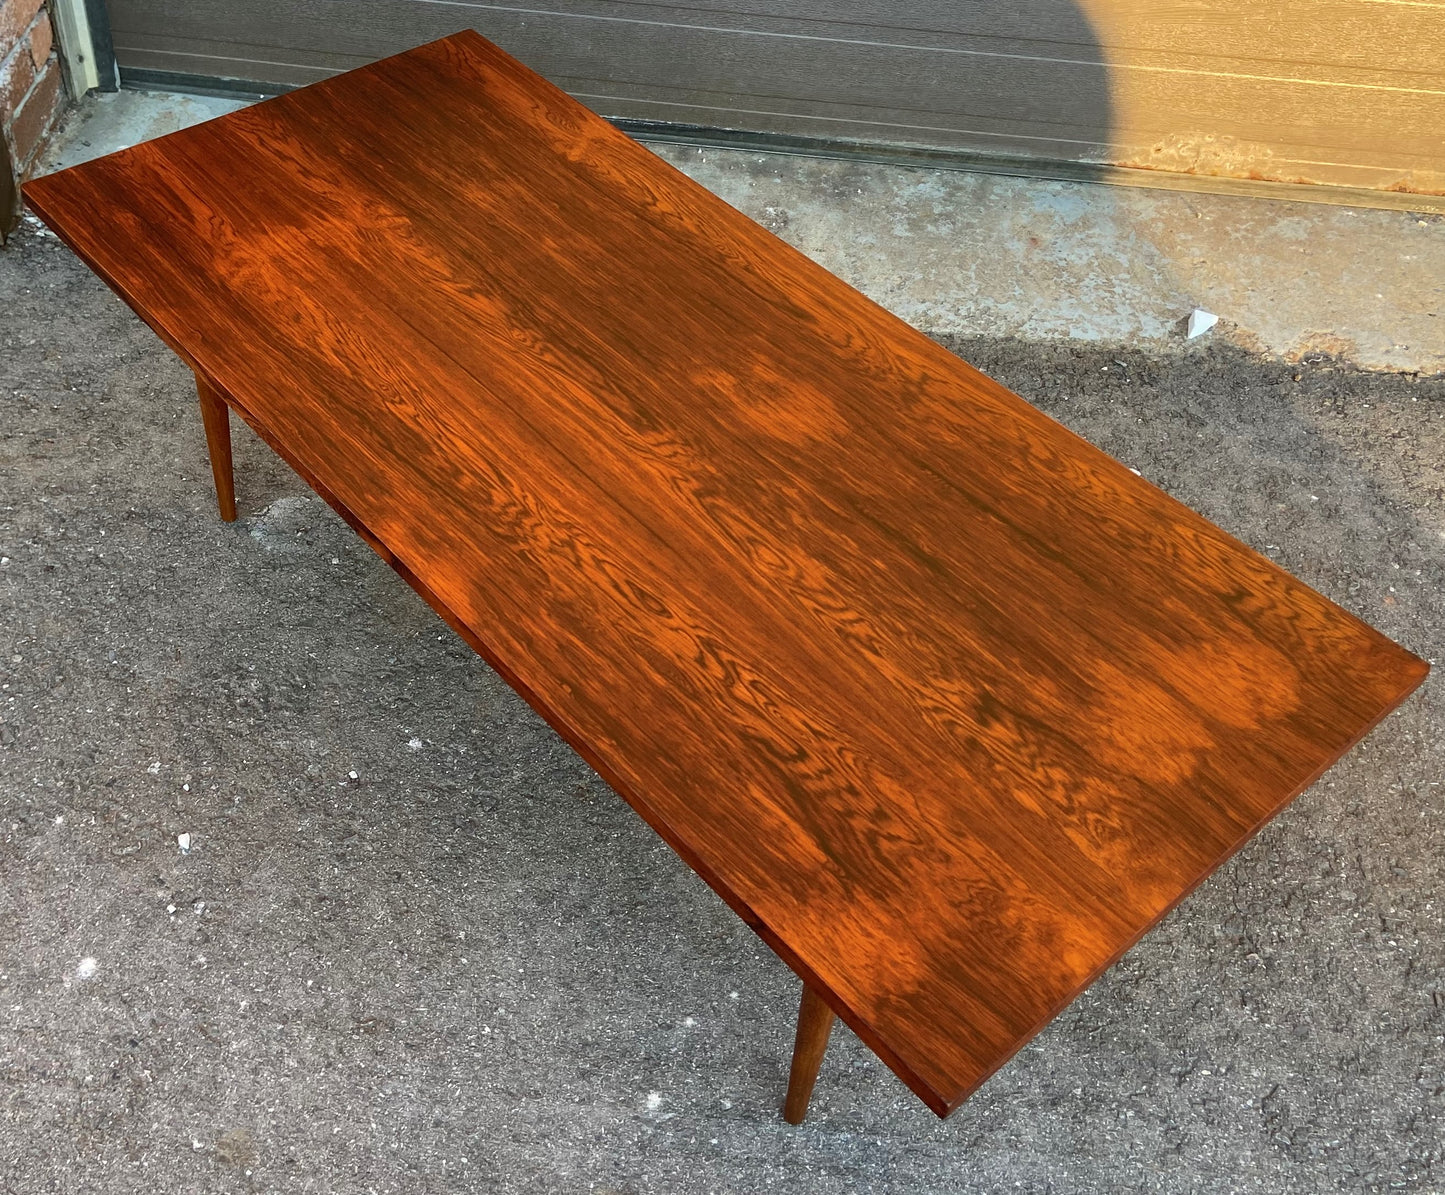 REFINISHED Mid Century Modern Rosewood Coffee Table 48 x 22